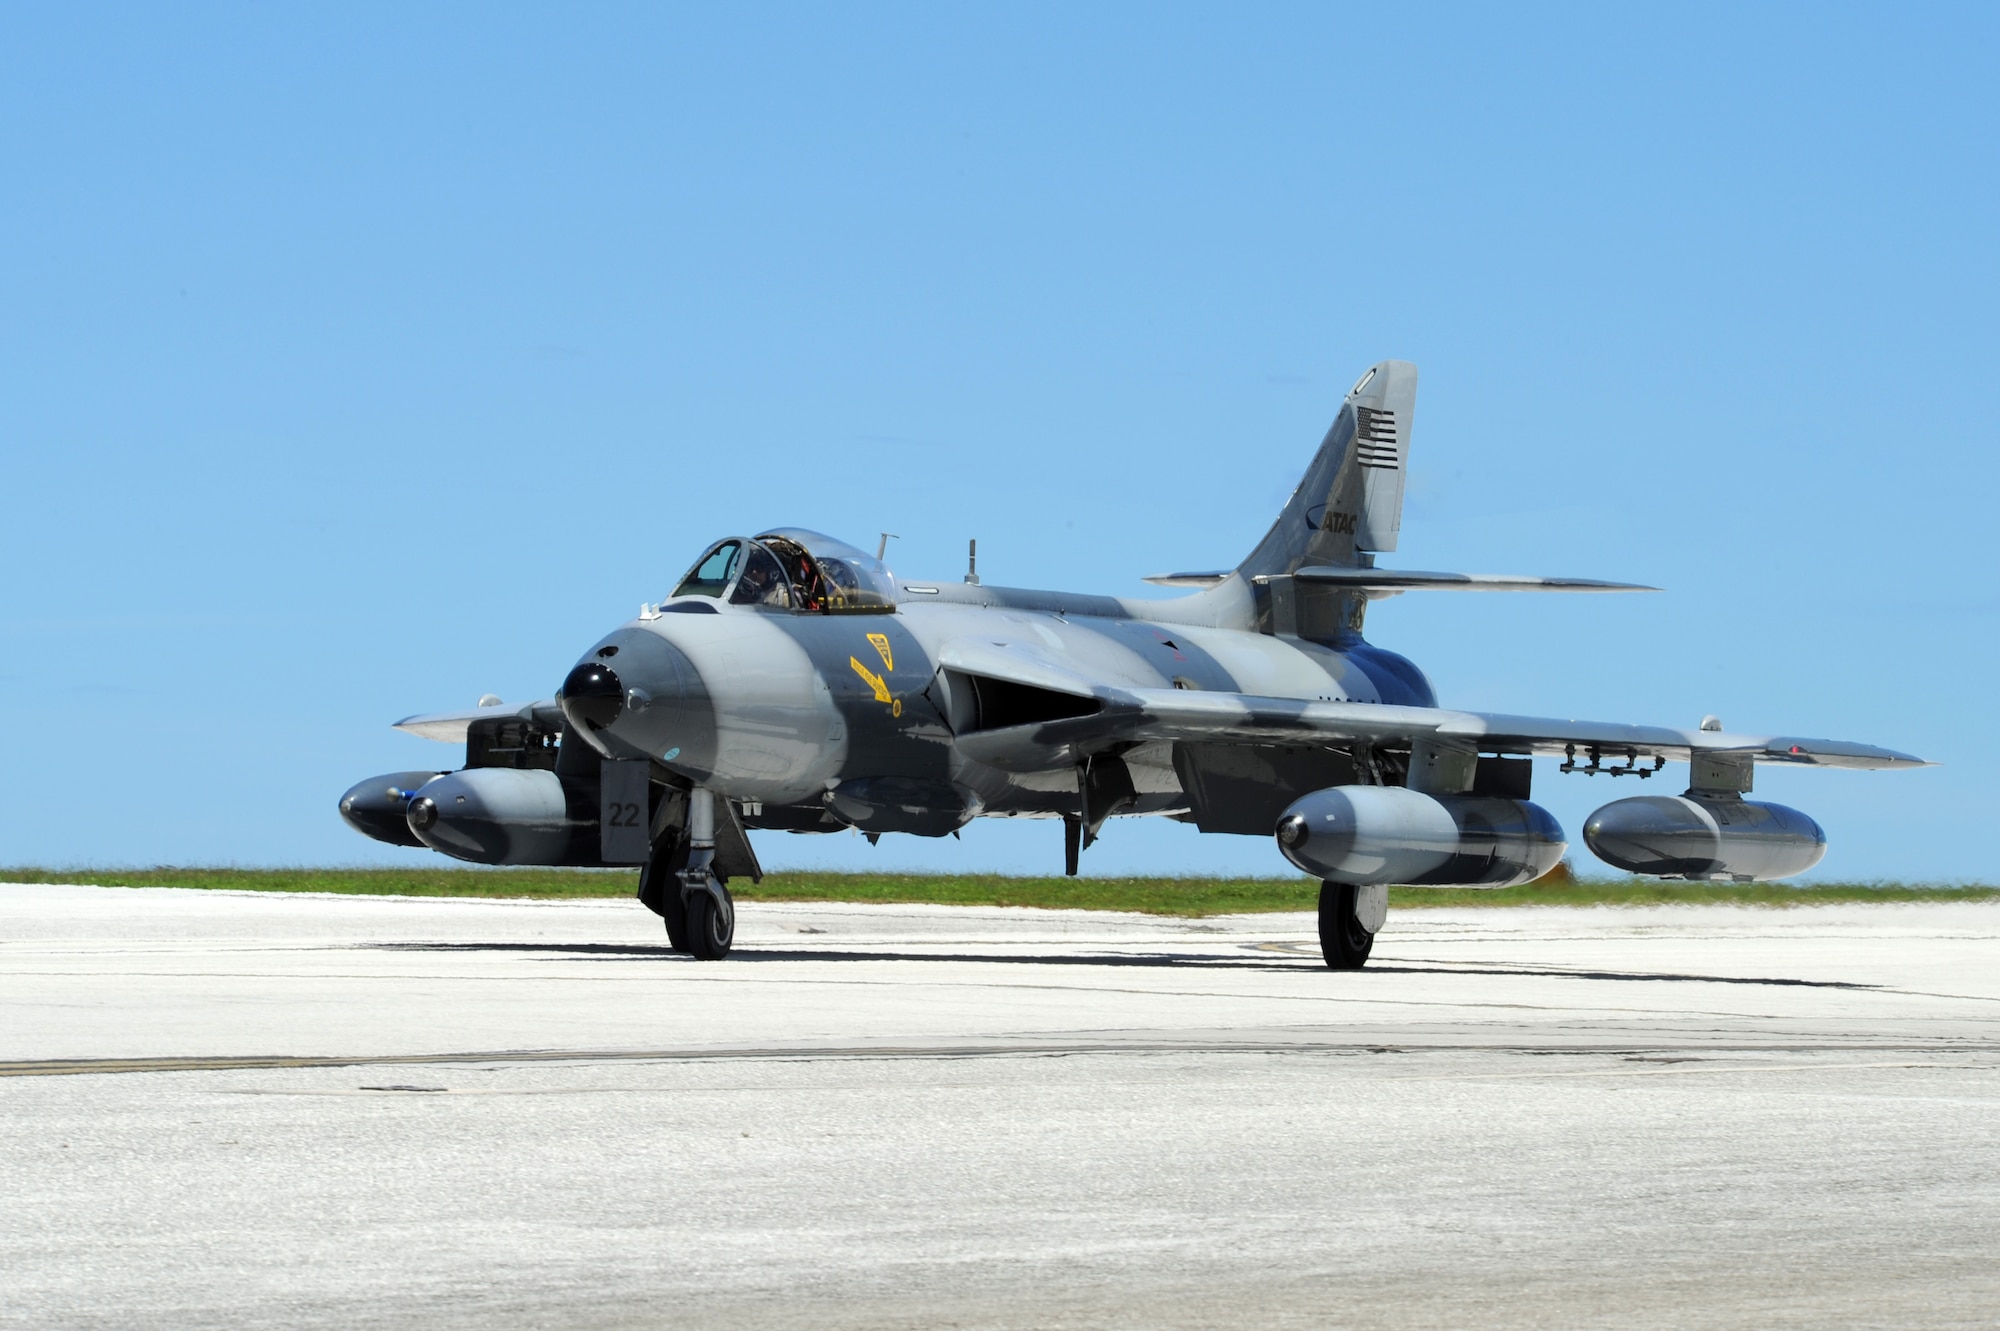 An F-16 aircraft, assigned to the 18th Aggressor Squadron, lands on Andersen Air Force Base in support of Exercise Valiant Shield. Valiant Shield is a training exercise with a focus on integration and proficiency of the U.S. Army, Navy, Air Force and Marine Corps through engaging units at sea, in the air, on land, and in cyberspace in response to the mission. (U.S. Navy photo by Mass Communication Specialist 2nd Class Chelsy Alamina)